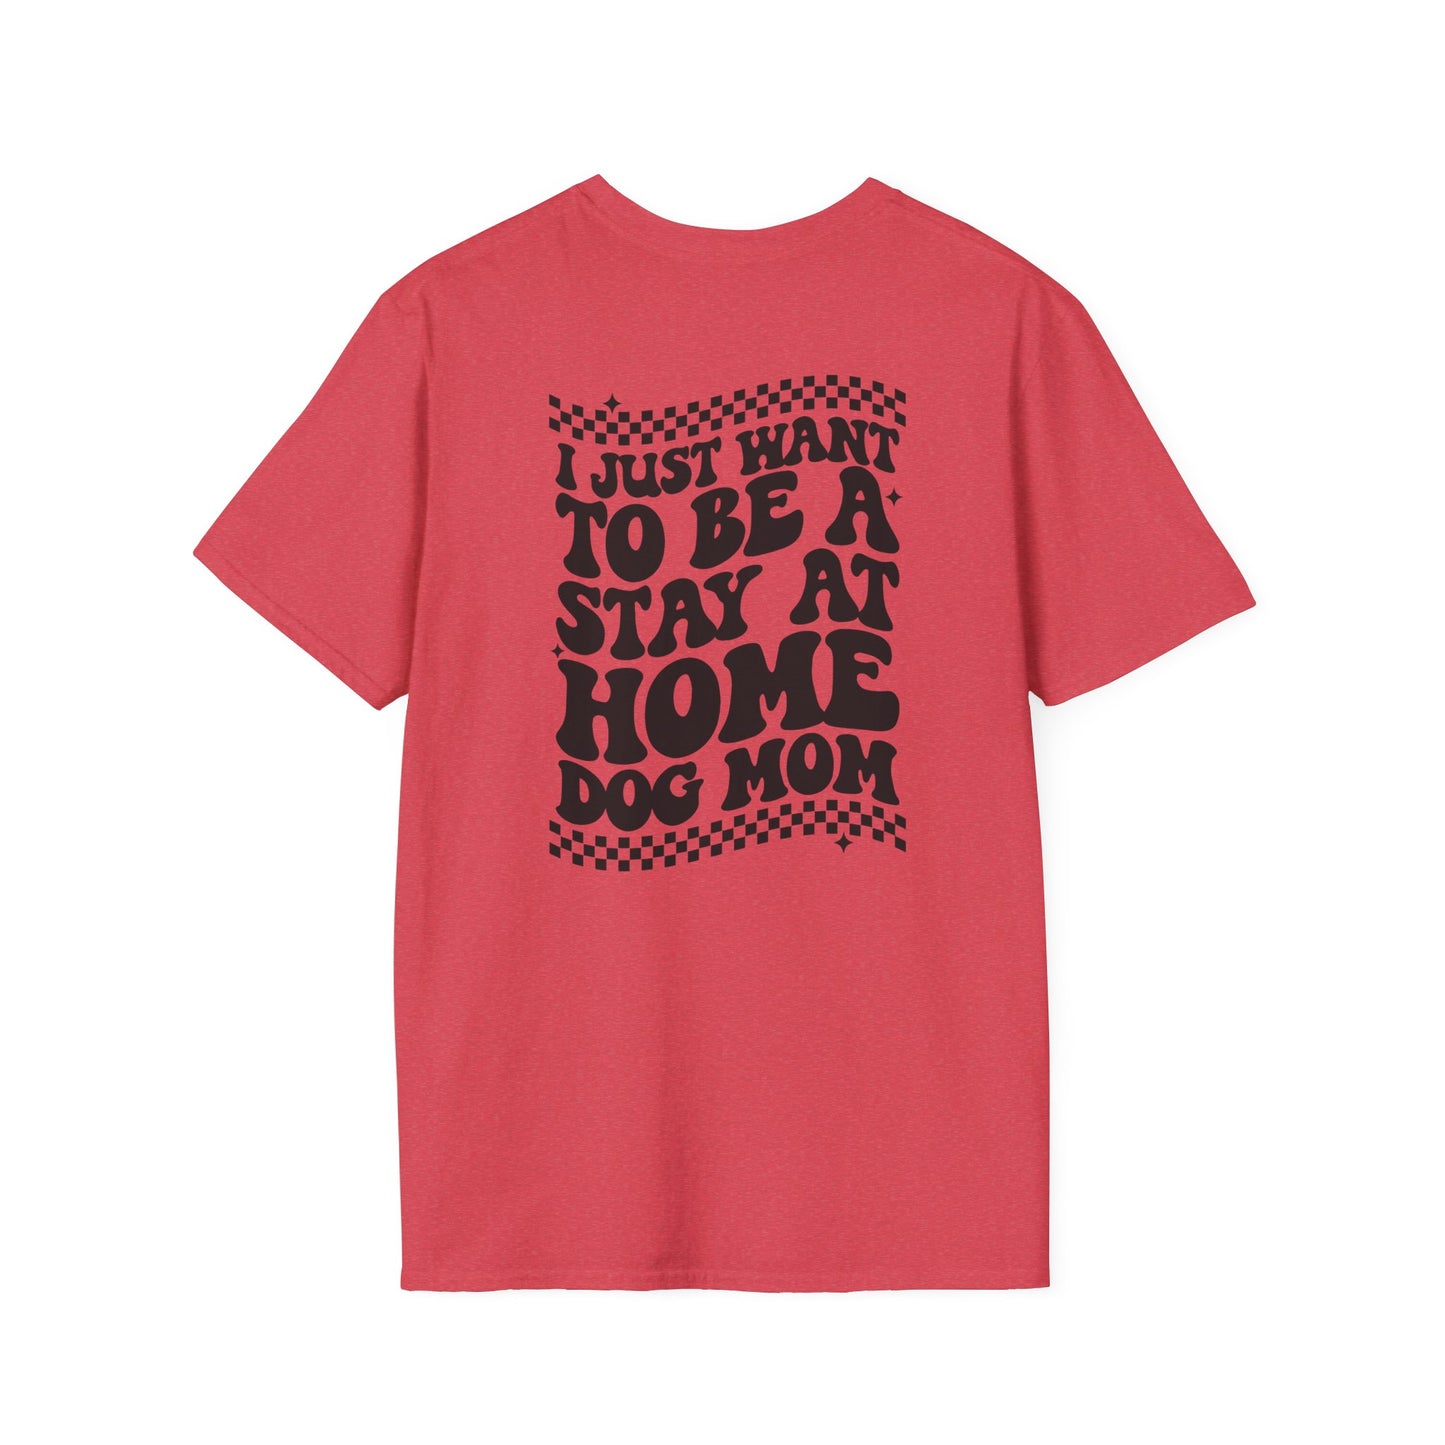 Stay at home dog mom - Unisex Softstyle T-Shirt